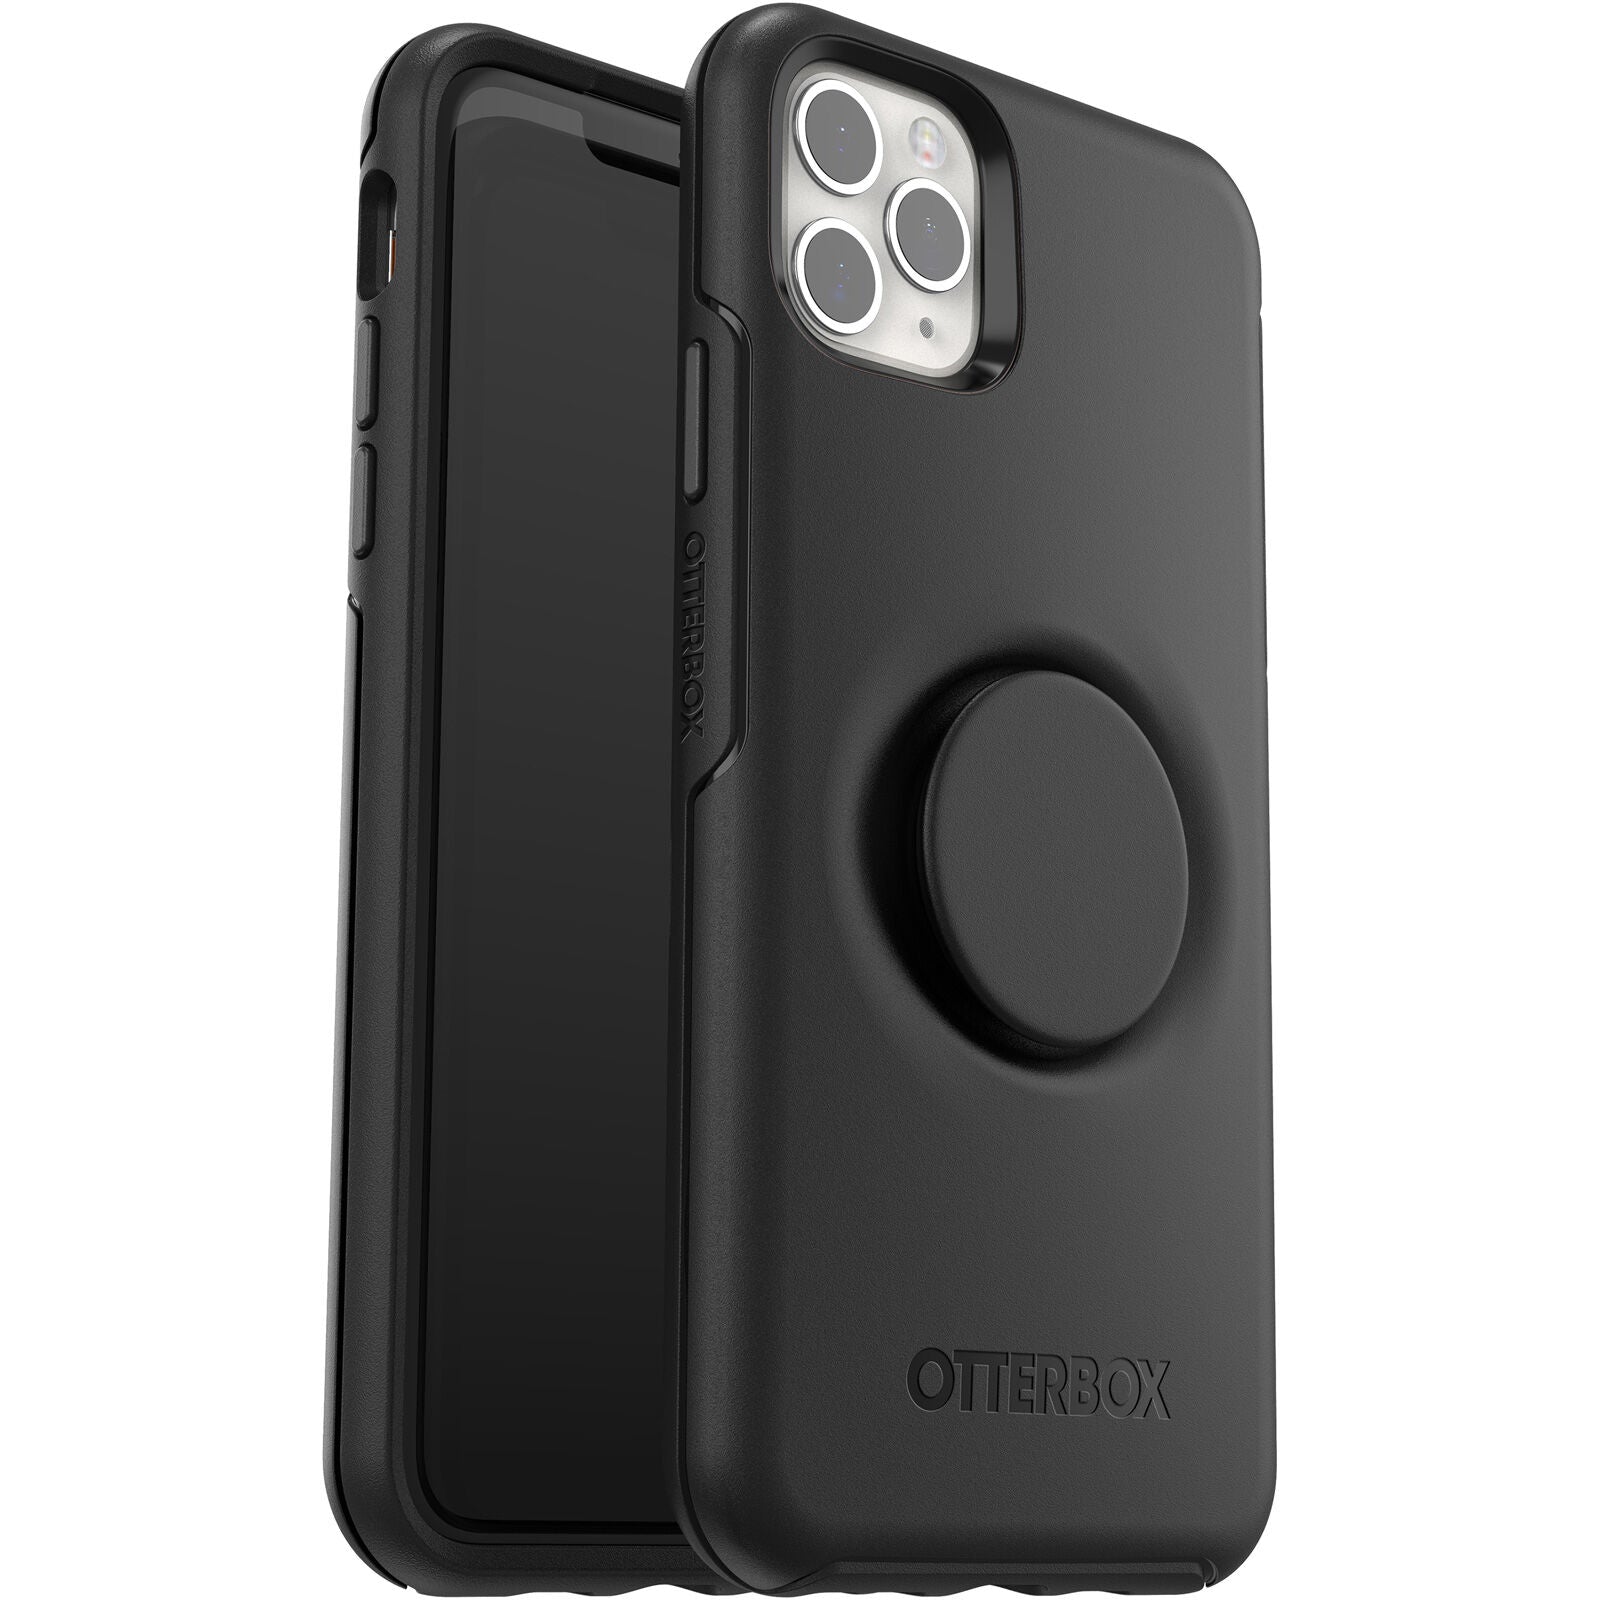 Otterbox Popsocket Case for iPhone 2019 X Large - Black